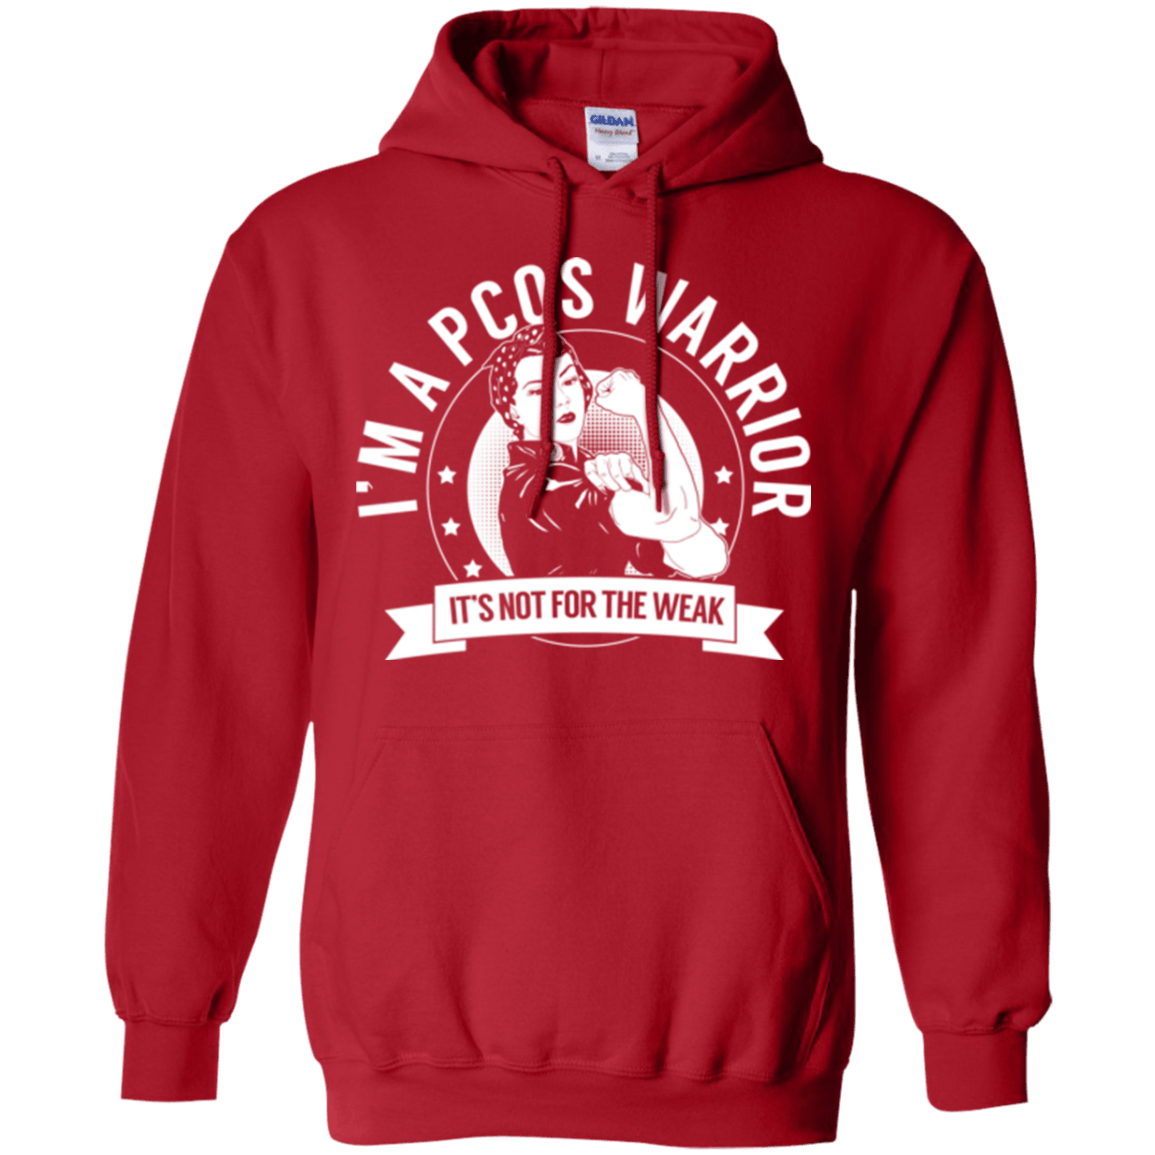 Polycystic Ovary Syndrome - PCOS Warrior Not For The Weak Pullover Hoodie 8 oz. - The Unchargeables